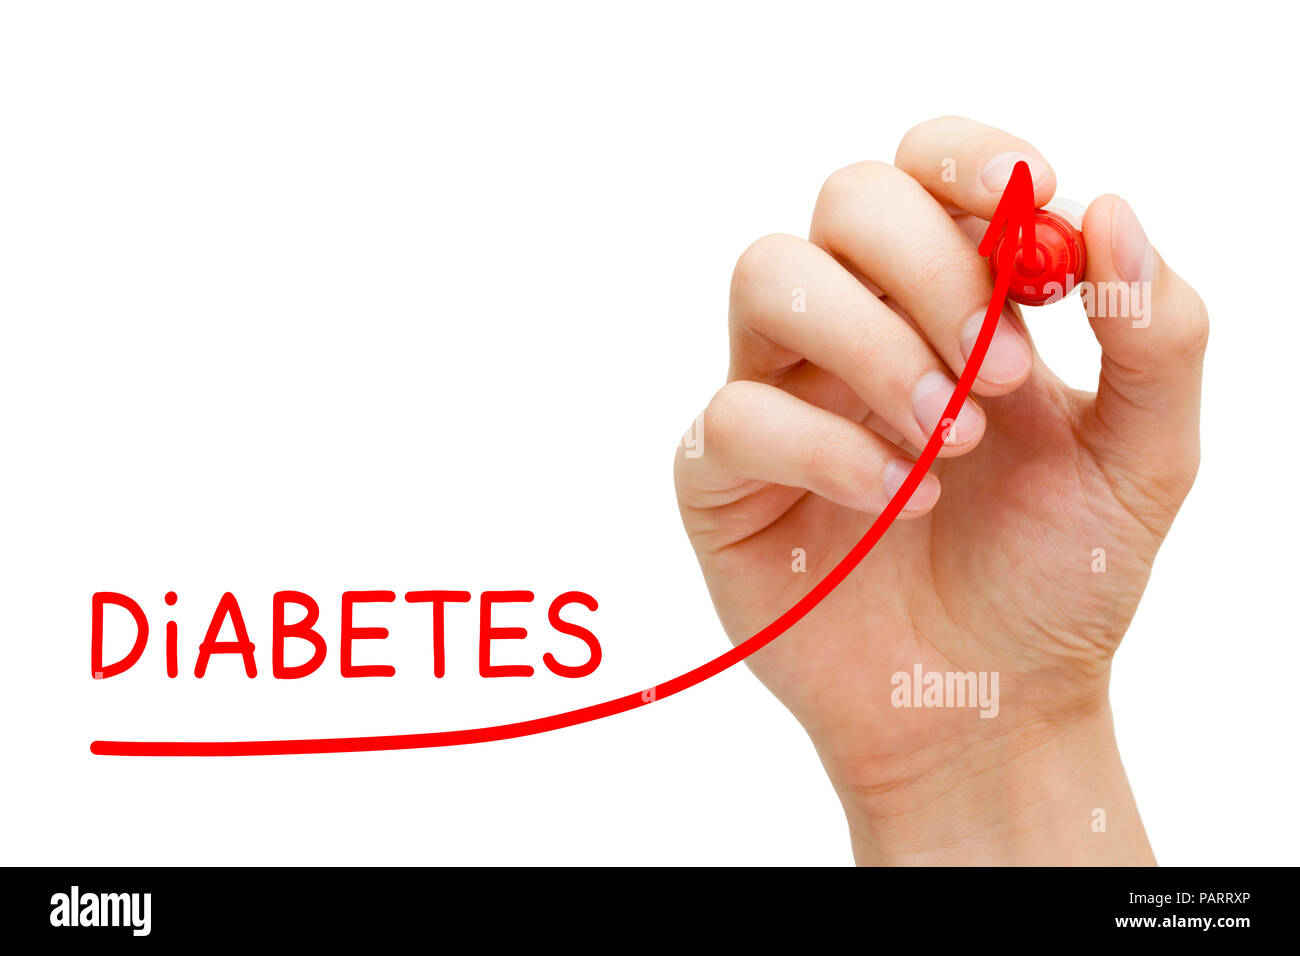 Hand drawing an arrow going up with red marker on transparent wipe board to illustrate the increasing incidence of diabetes. Stock Photo